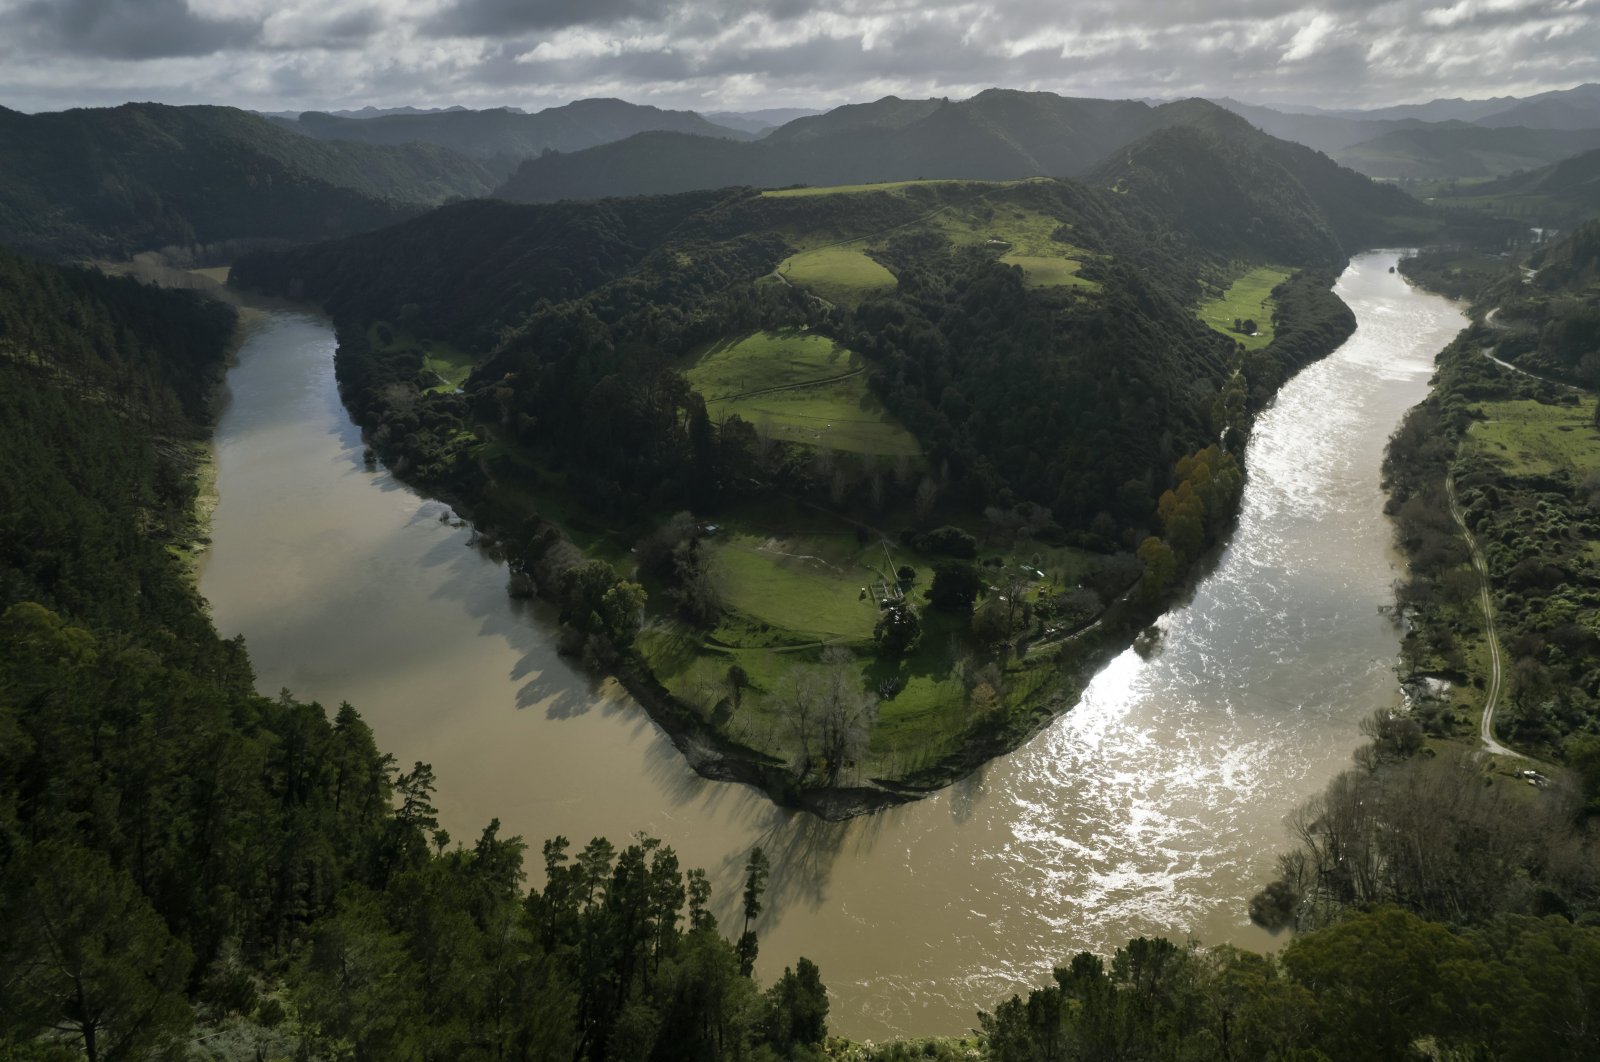 The lower reaches of the Whanganui River flow near the Kaiwhaiki settlement in New Zealand, June 15, 2022. (AP Photo)